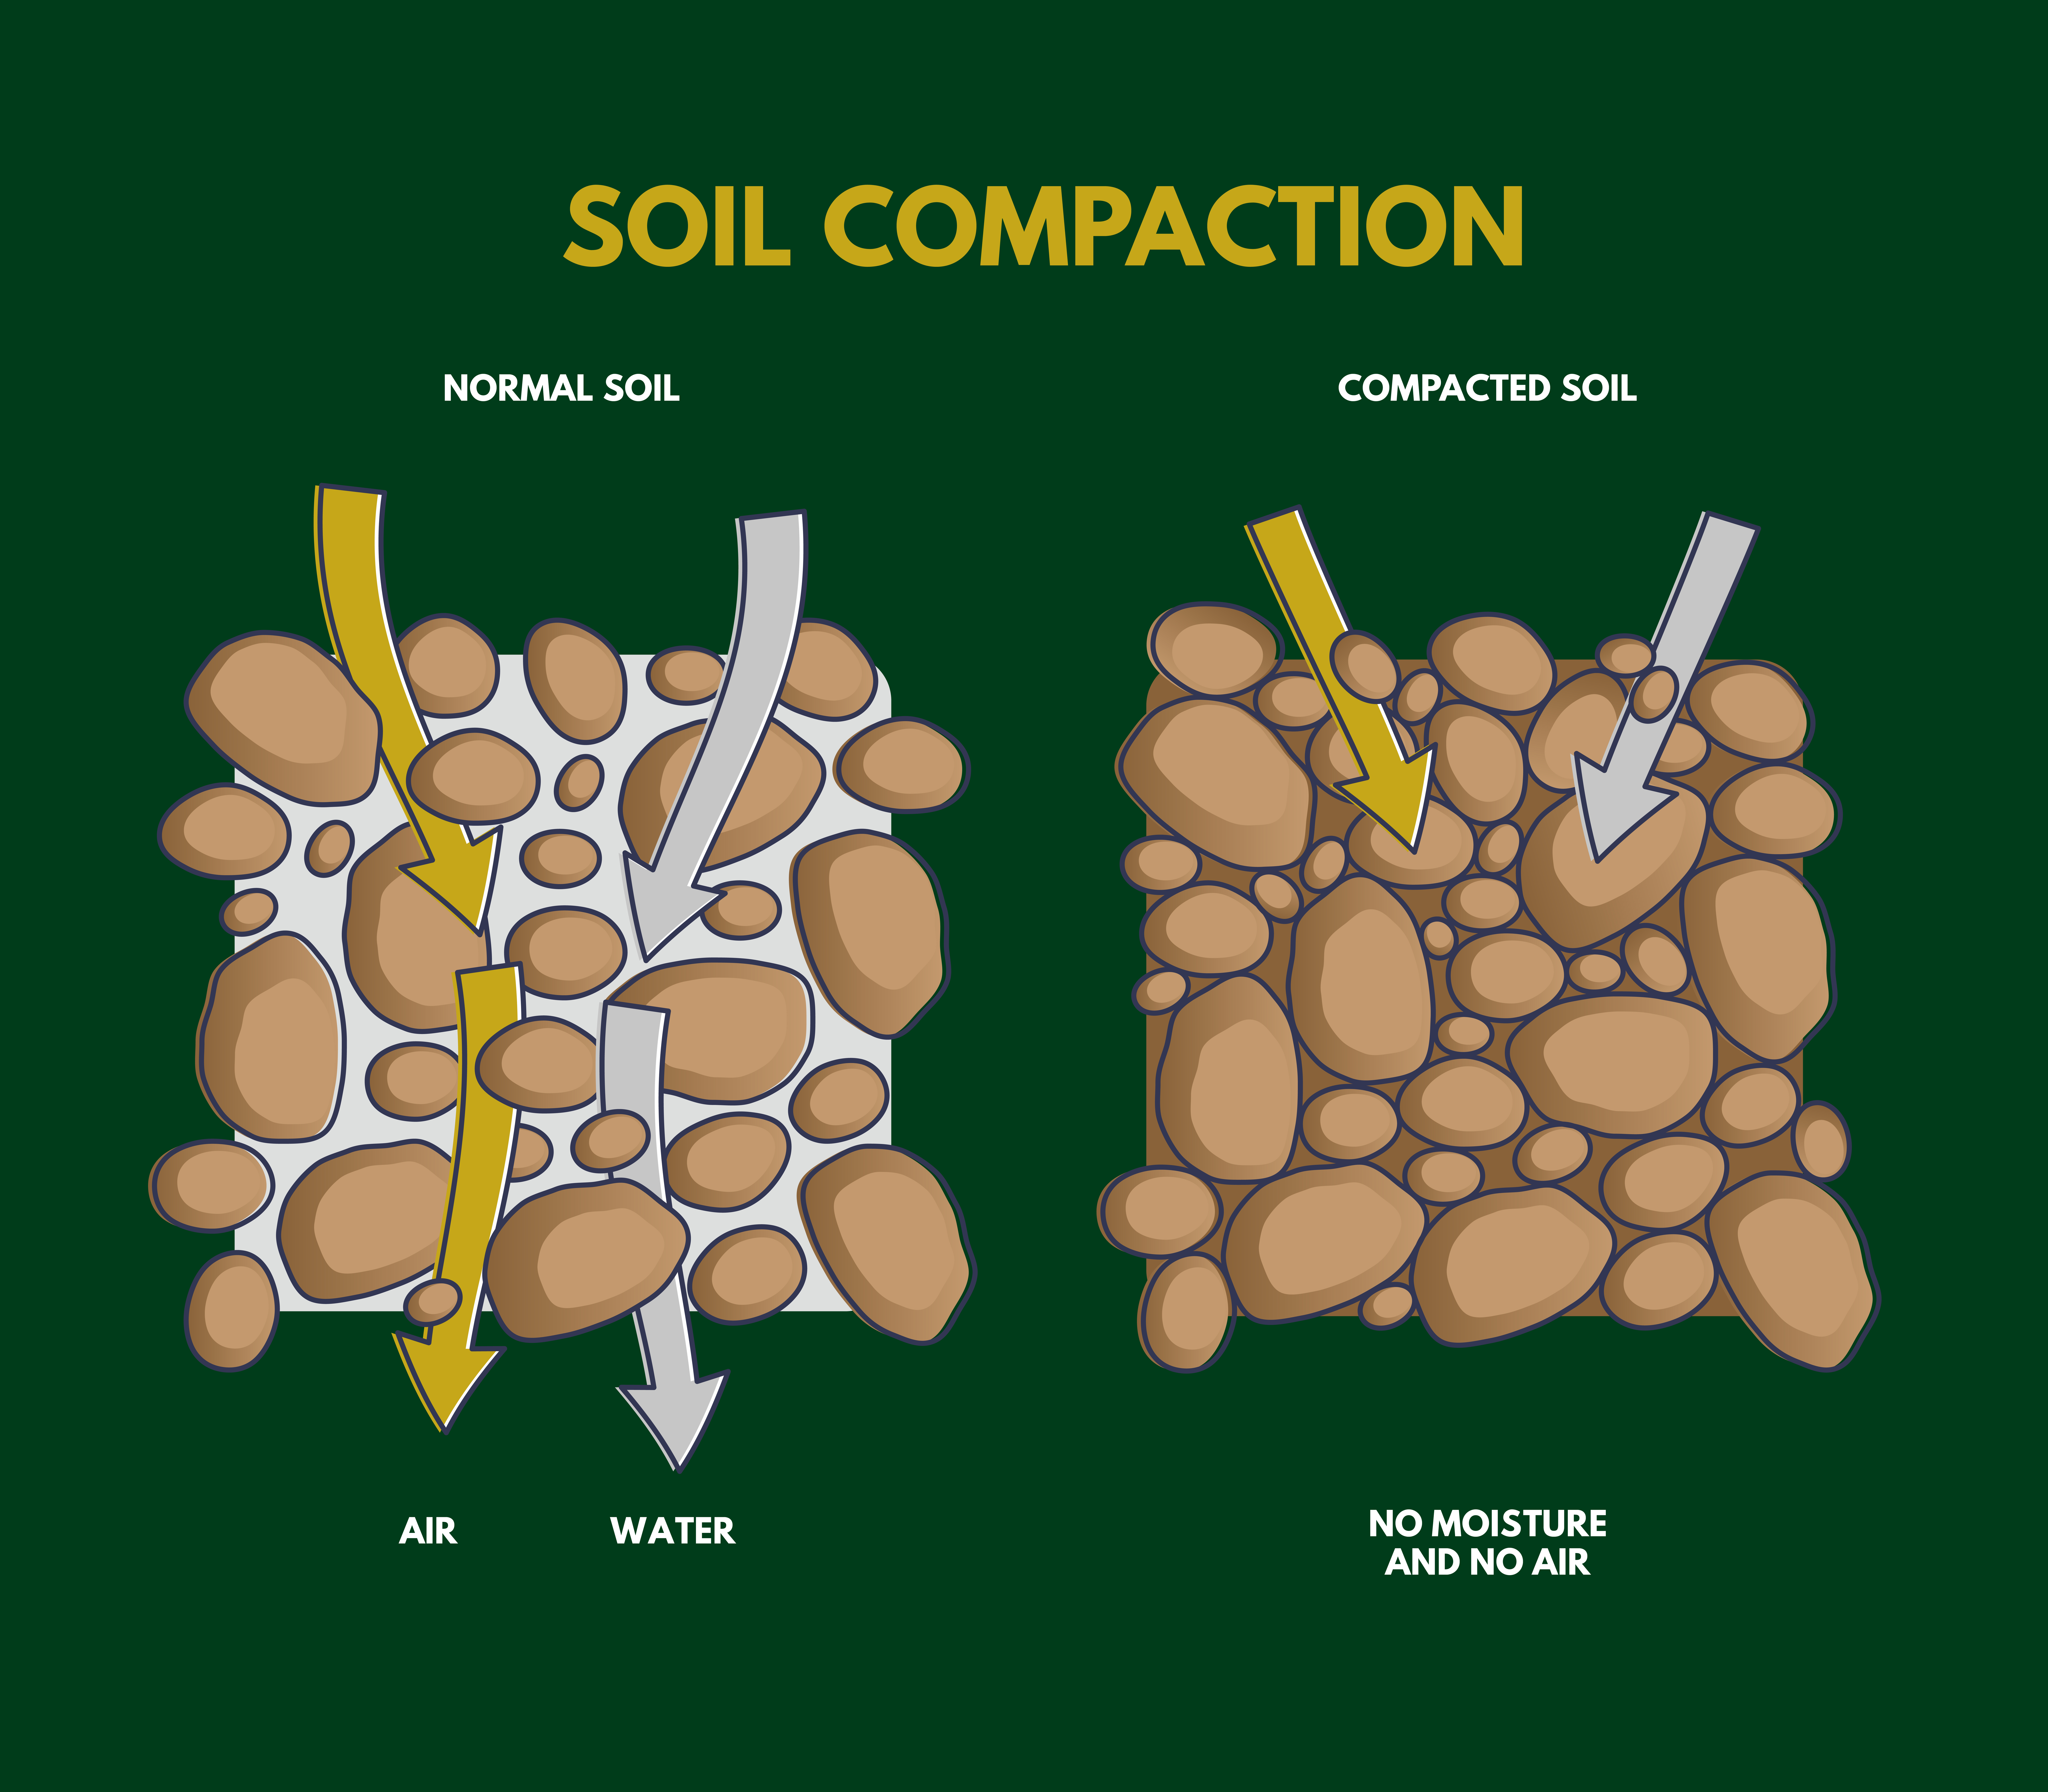 Normal soil has enough space for air and water to filter through, keeping it healthy, while compacted soil is pressed tightly together, reducing the available space for air and water.